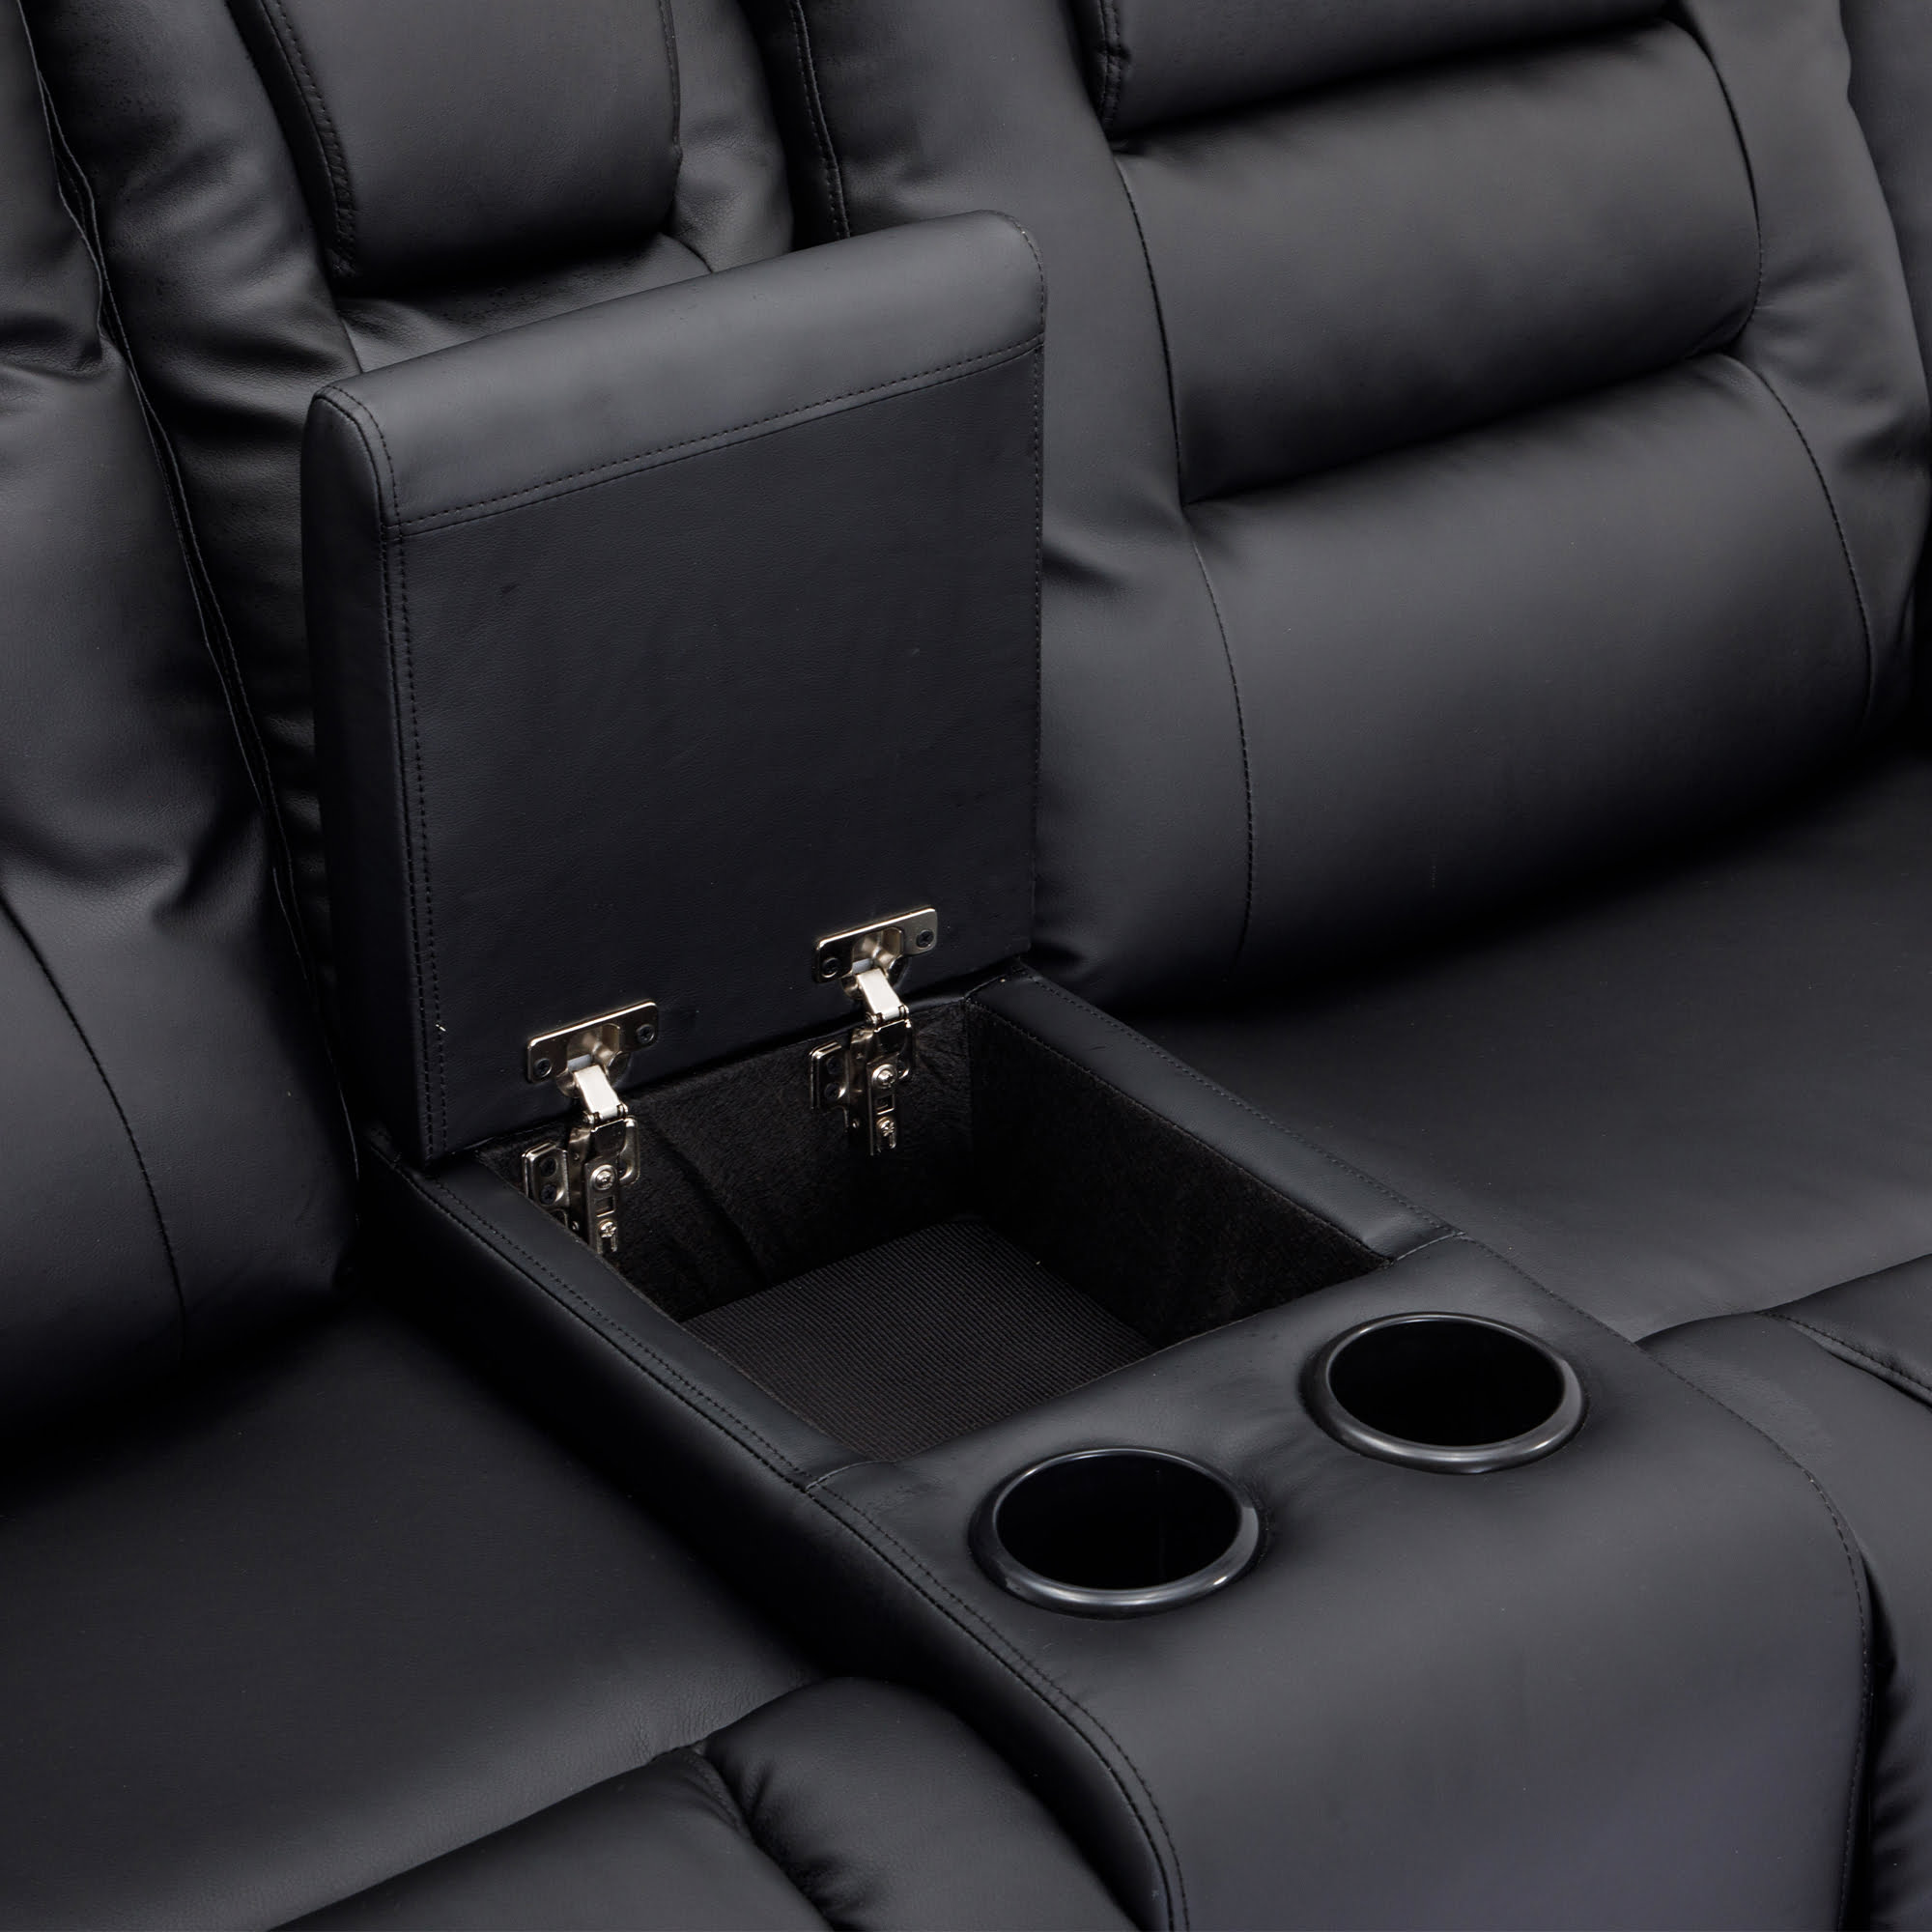 2 Seat Home Theater Seating - PP302954AAB